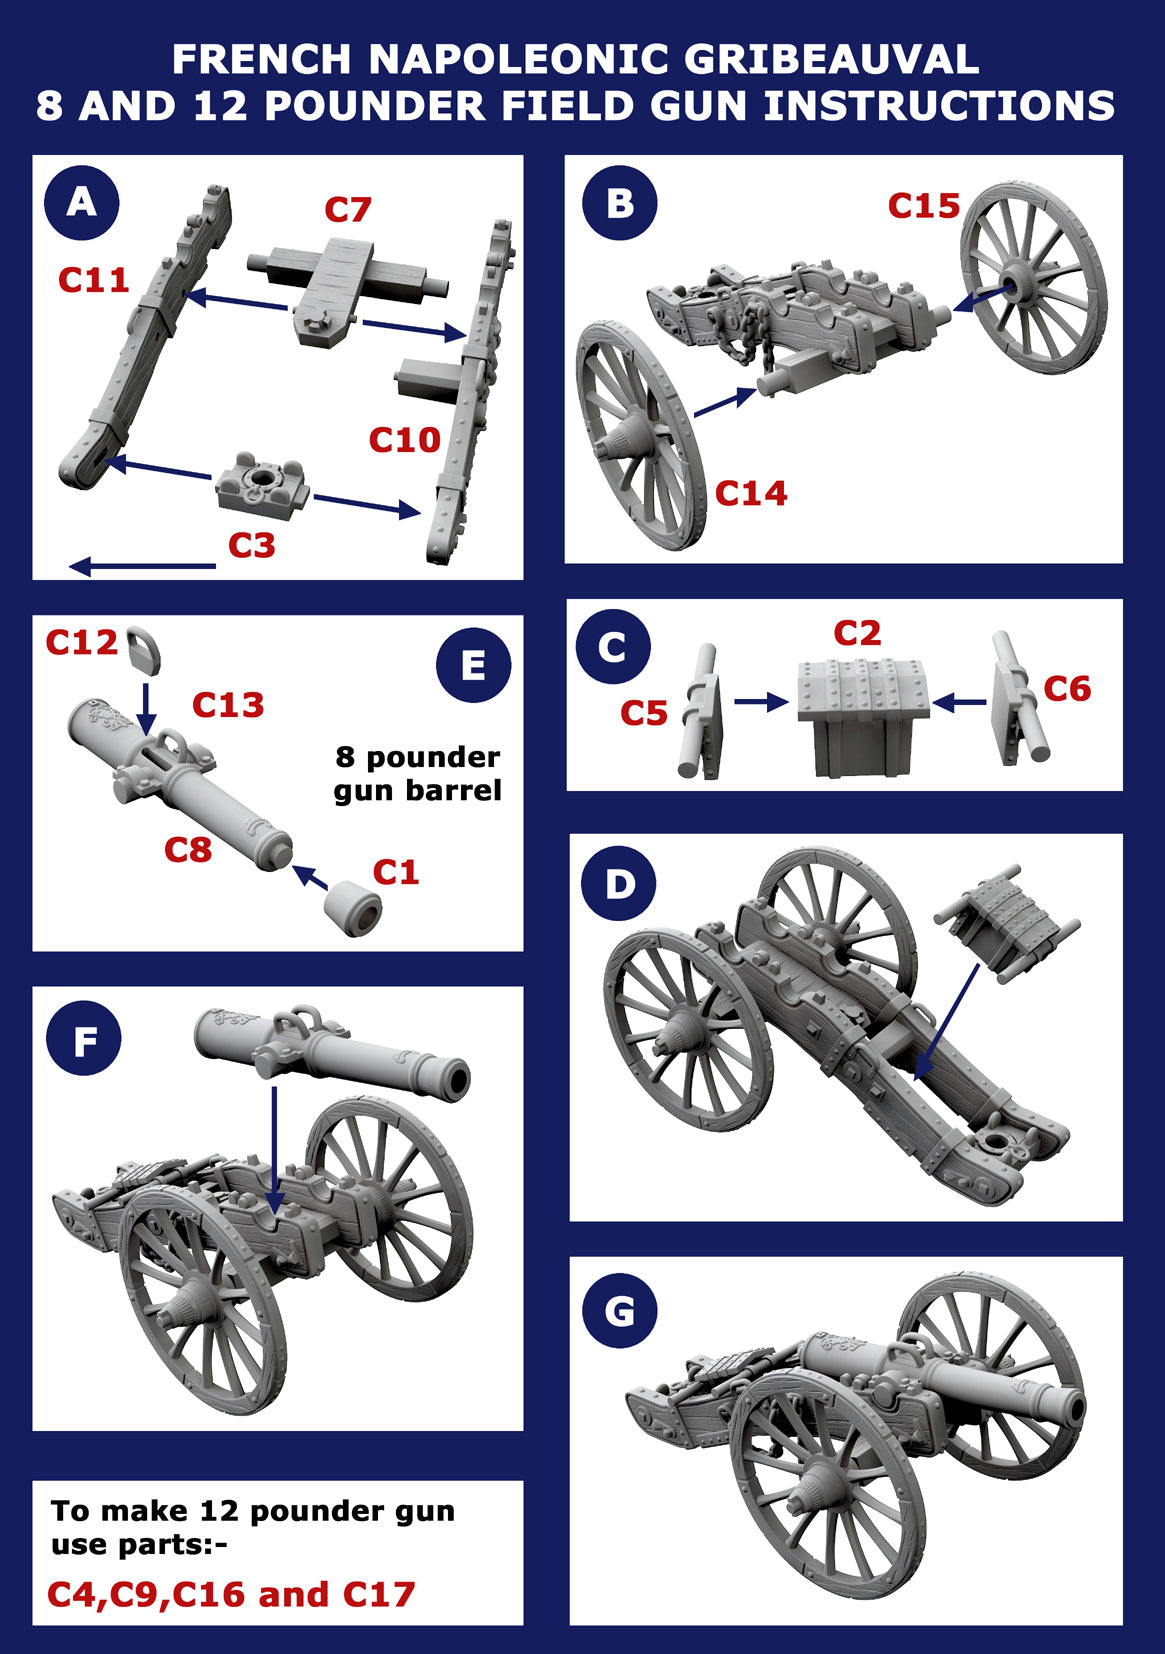 French Napoleonic Artillery 1804 to 1812